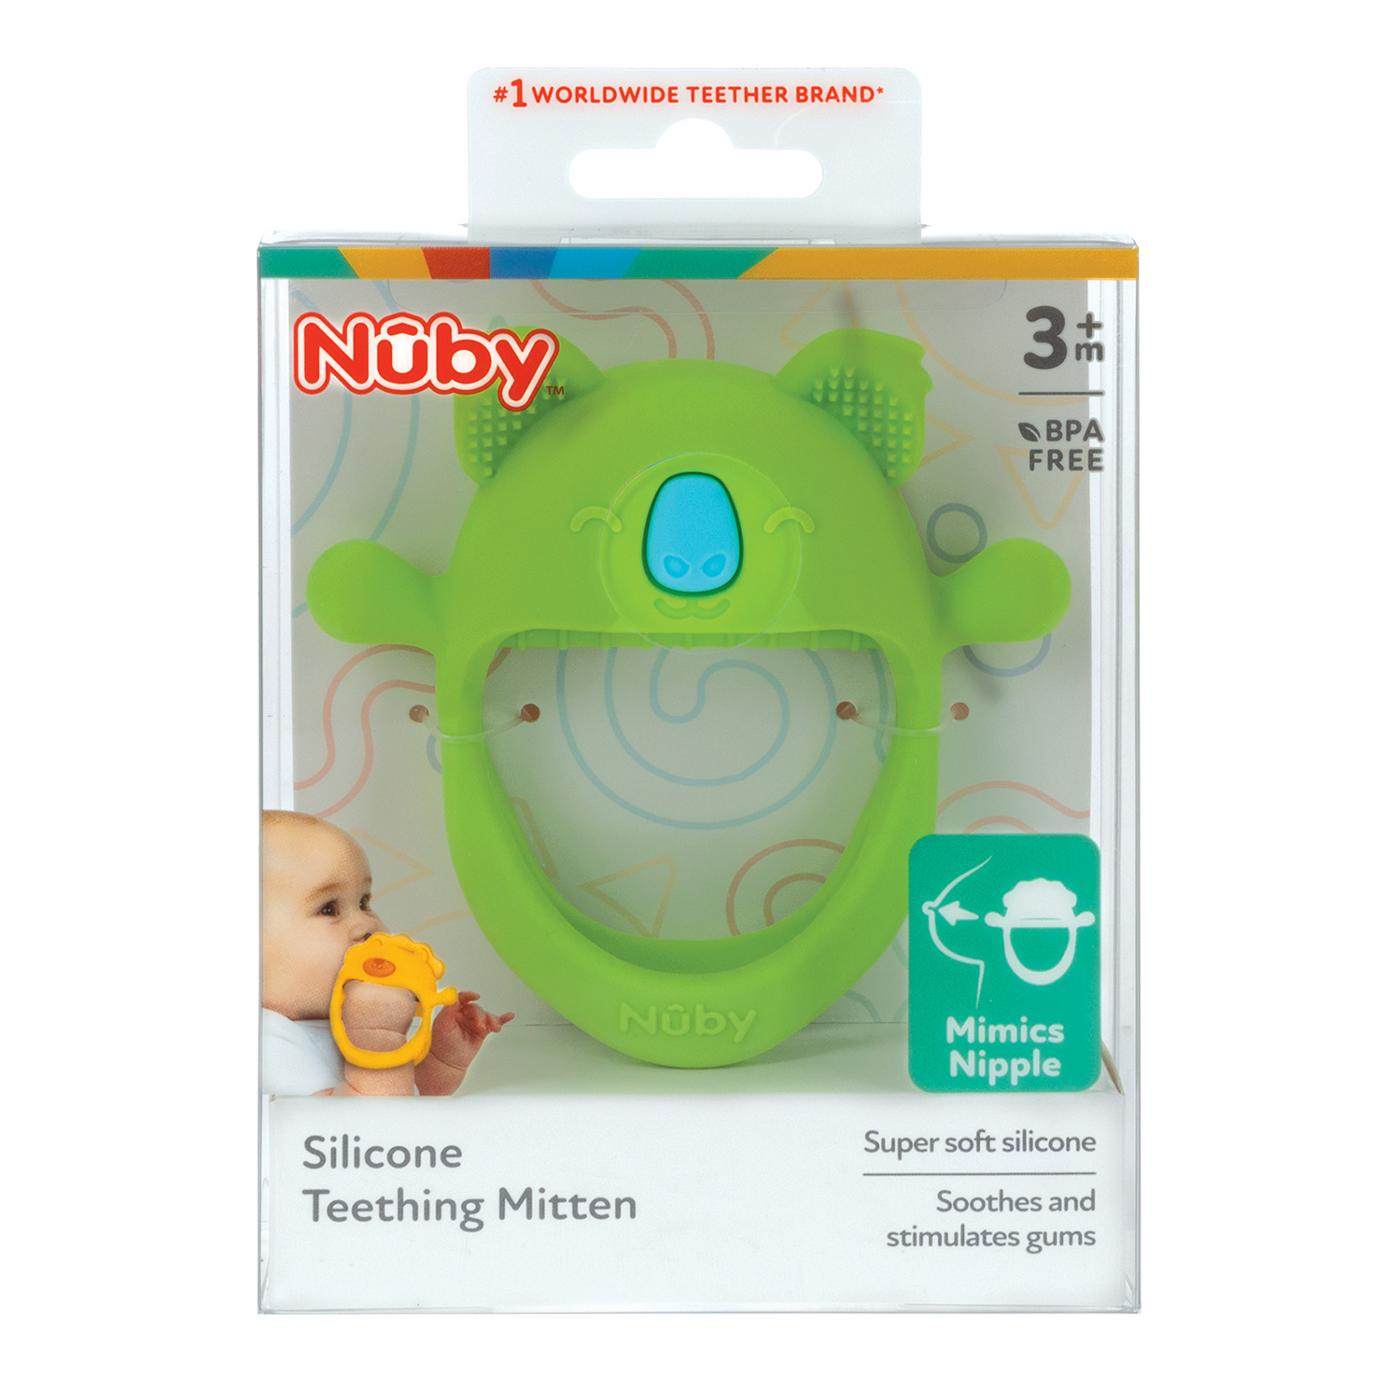 Nuby Silicone Teething Mitten; image 1 of 3